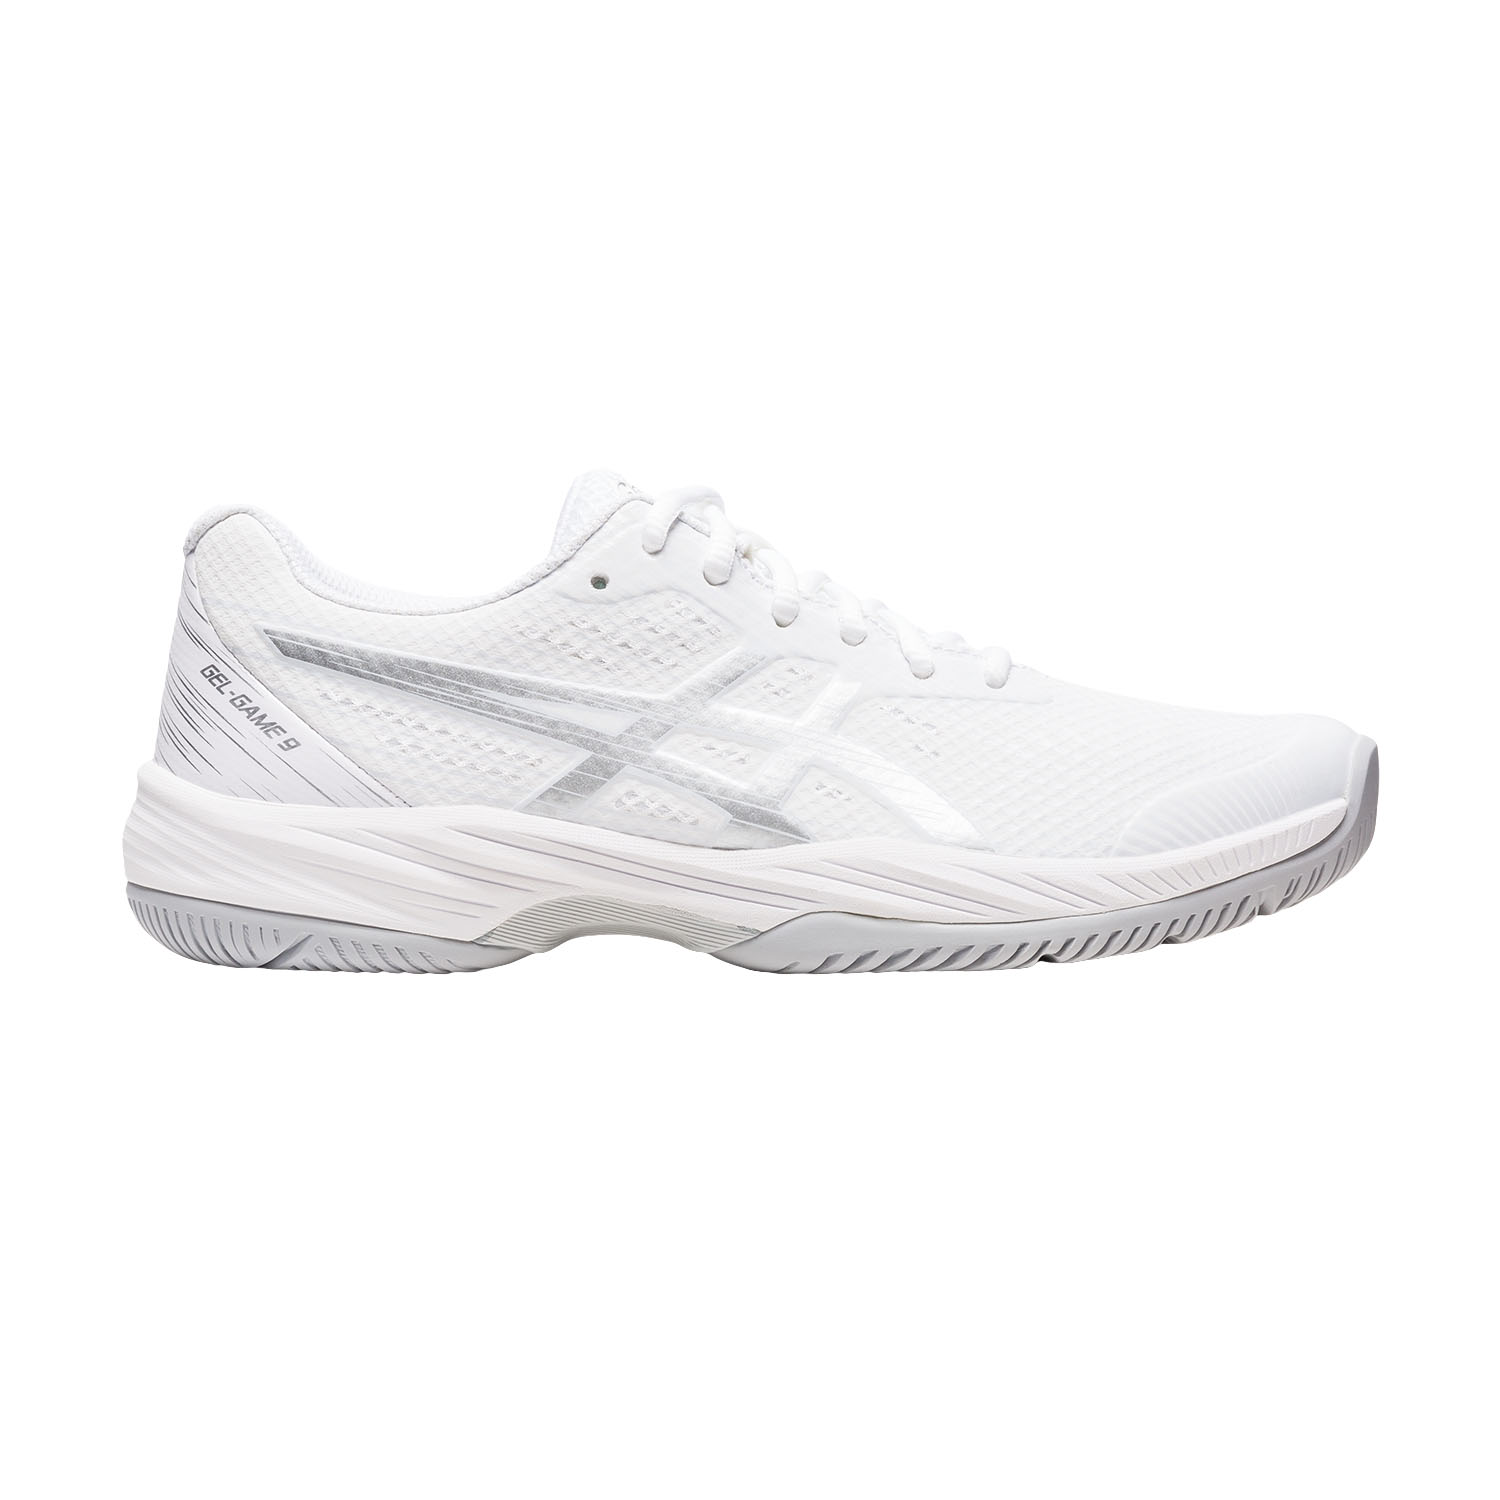 Asics Gel Game 9 - White/Pure Silver